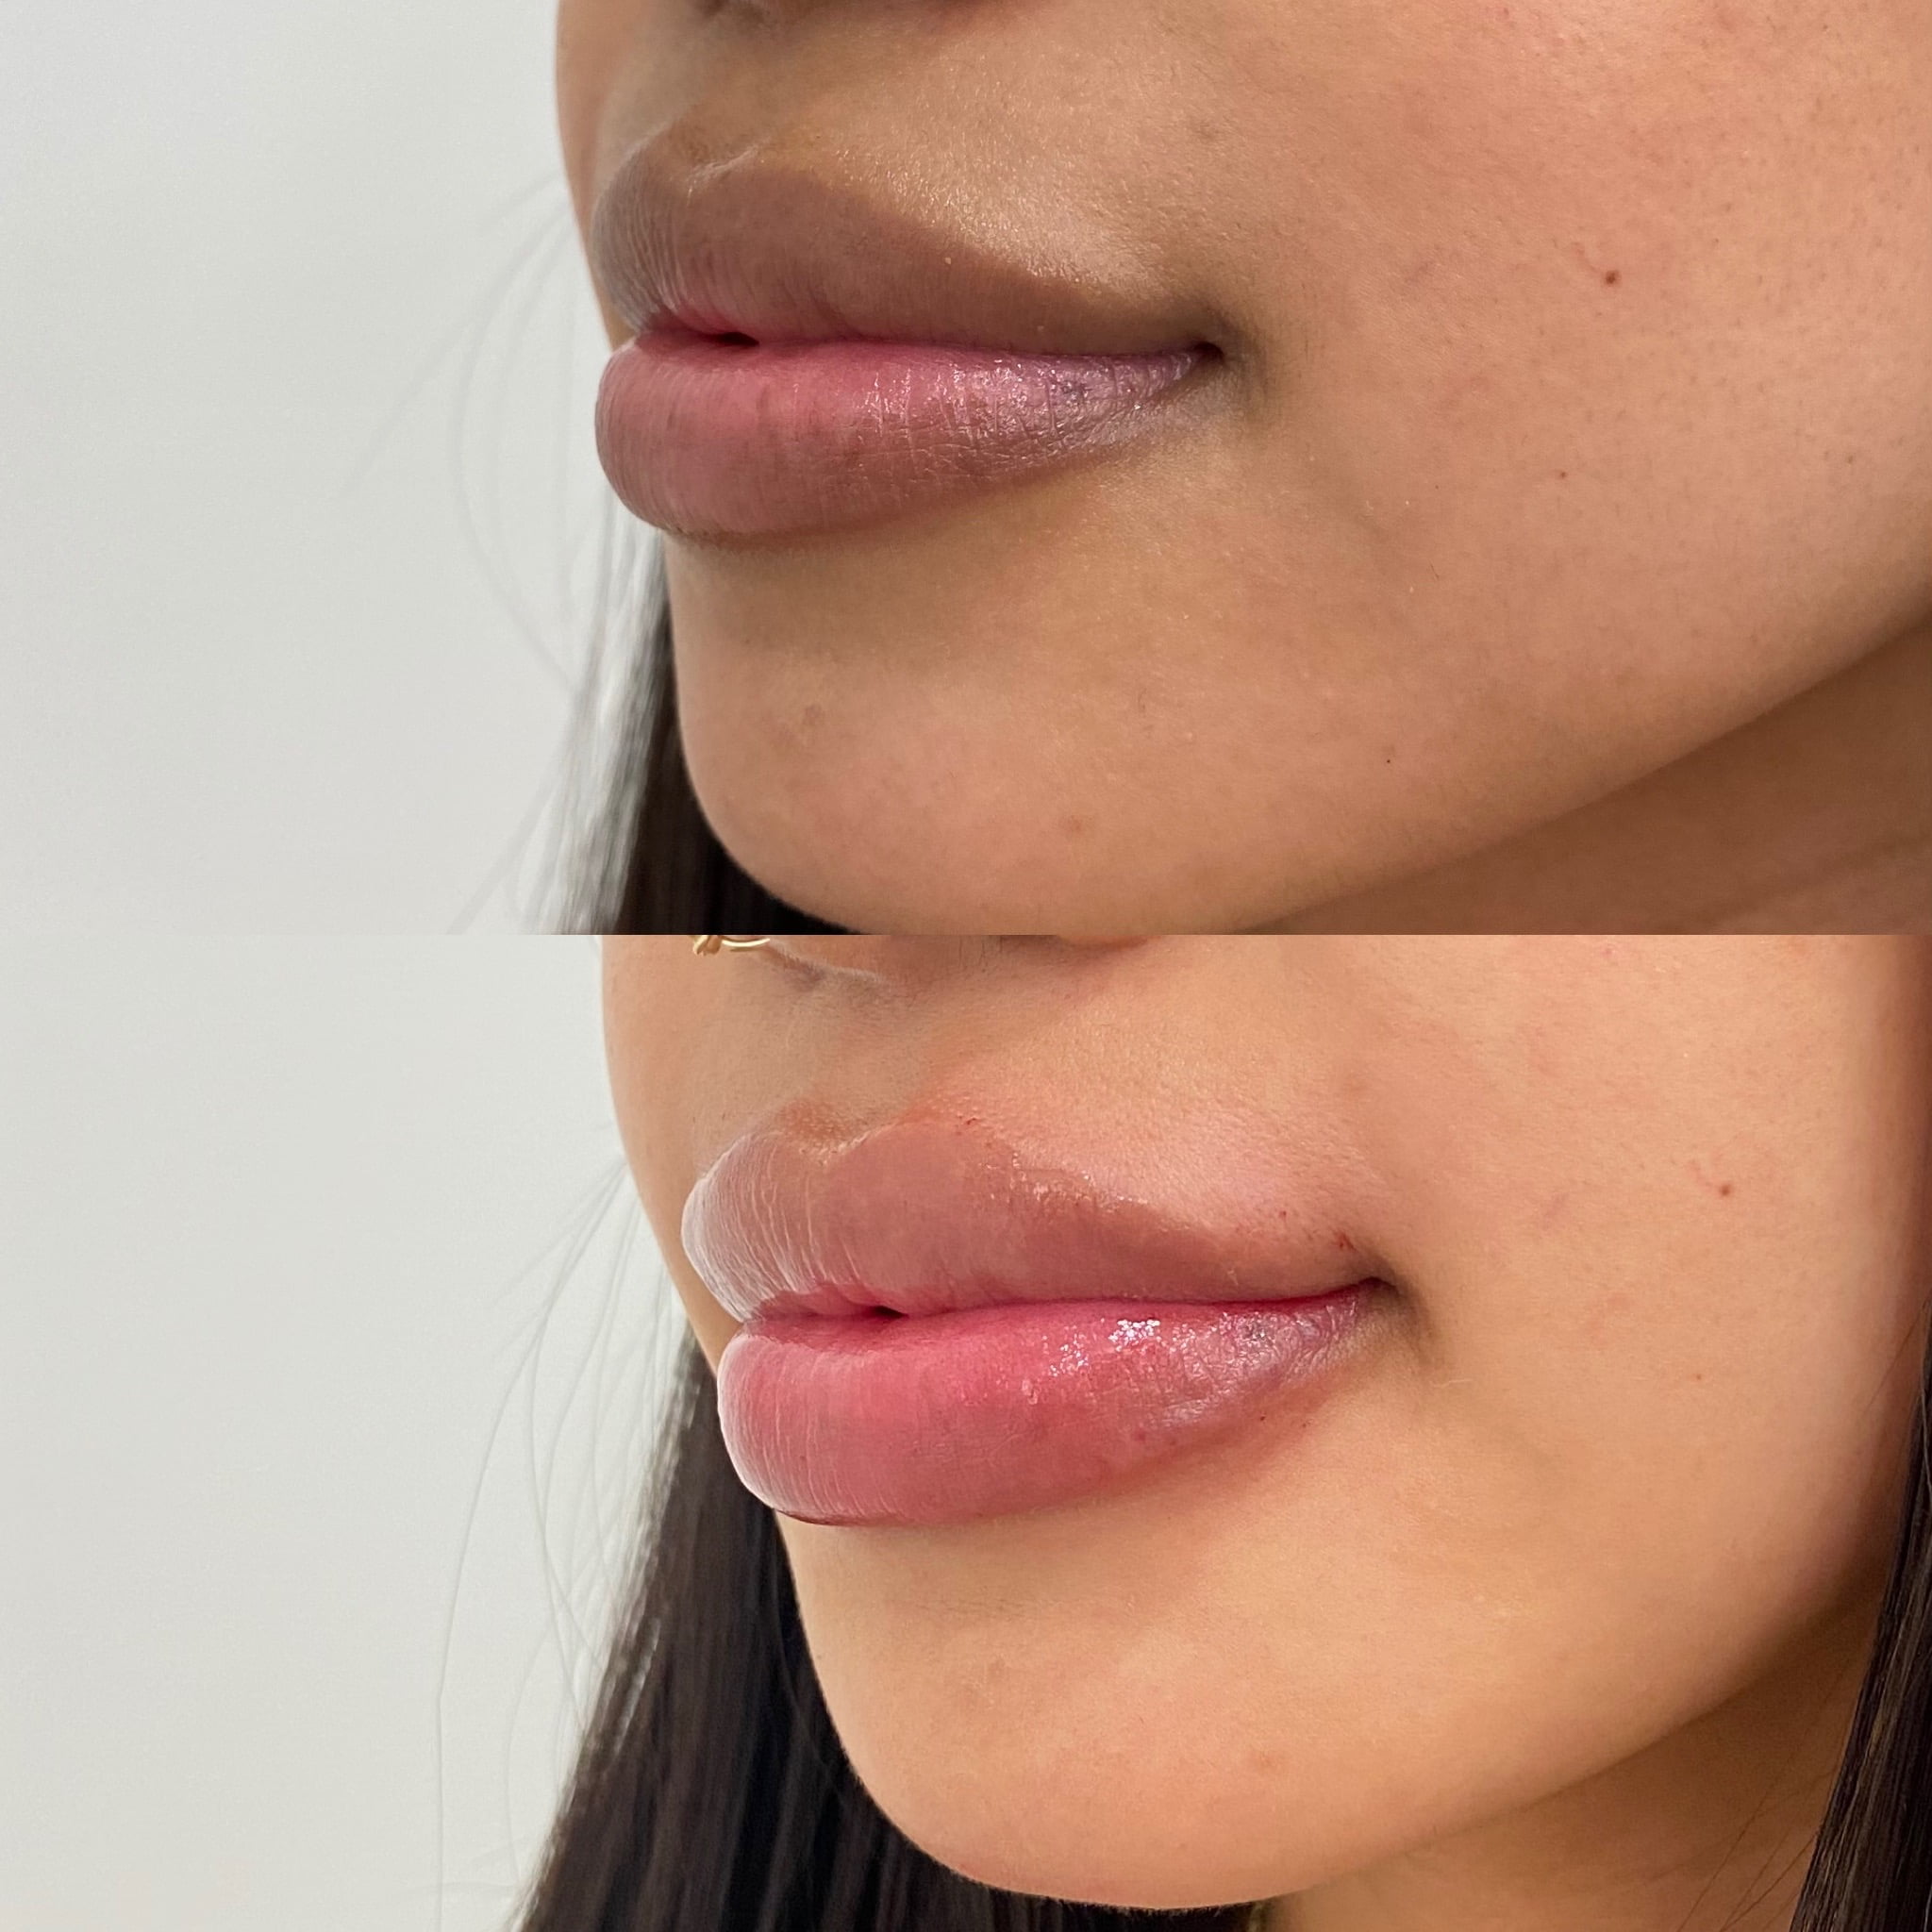 Before and After Lip boost Treatment | Beauty Boost Med Spa in Newport Beach, CA